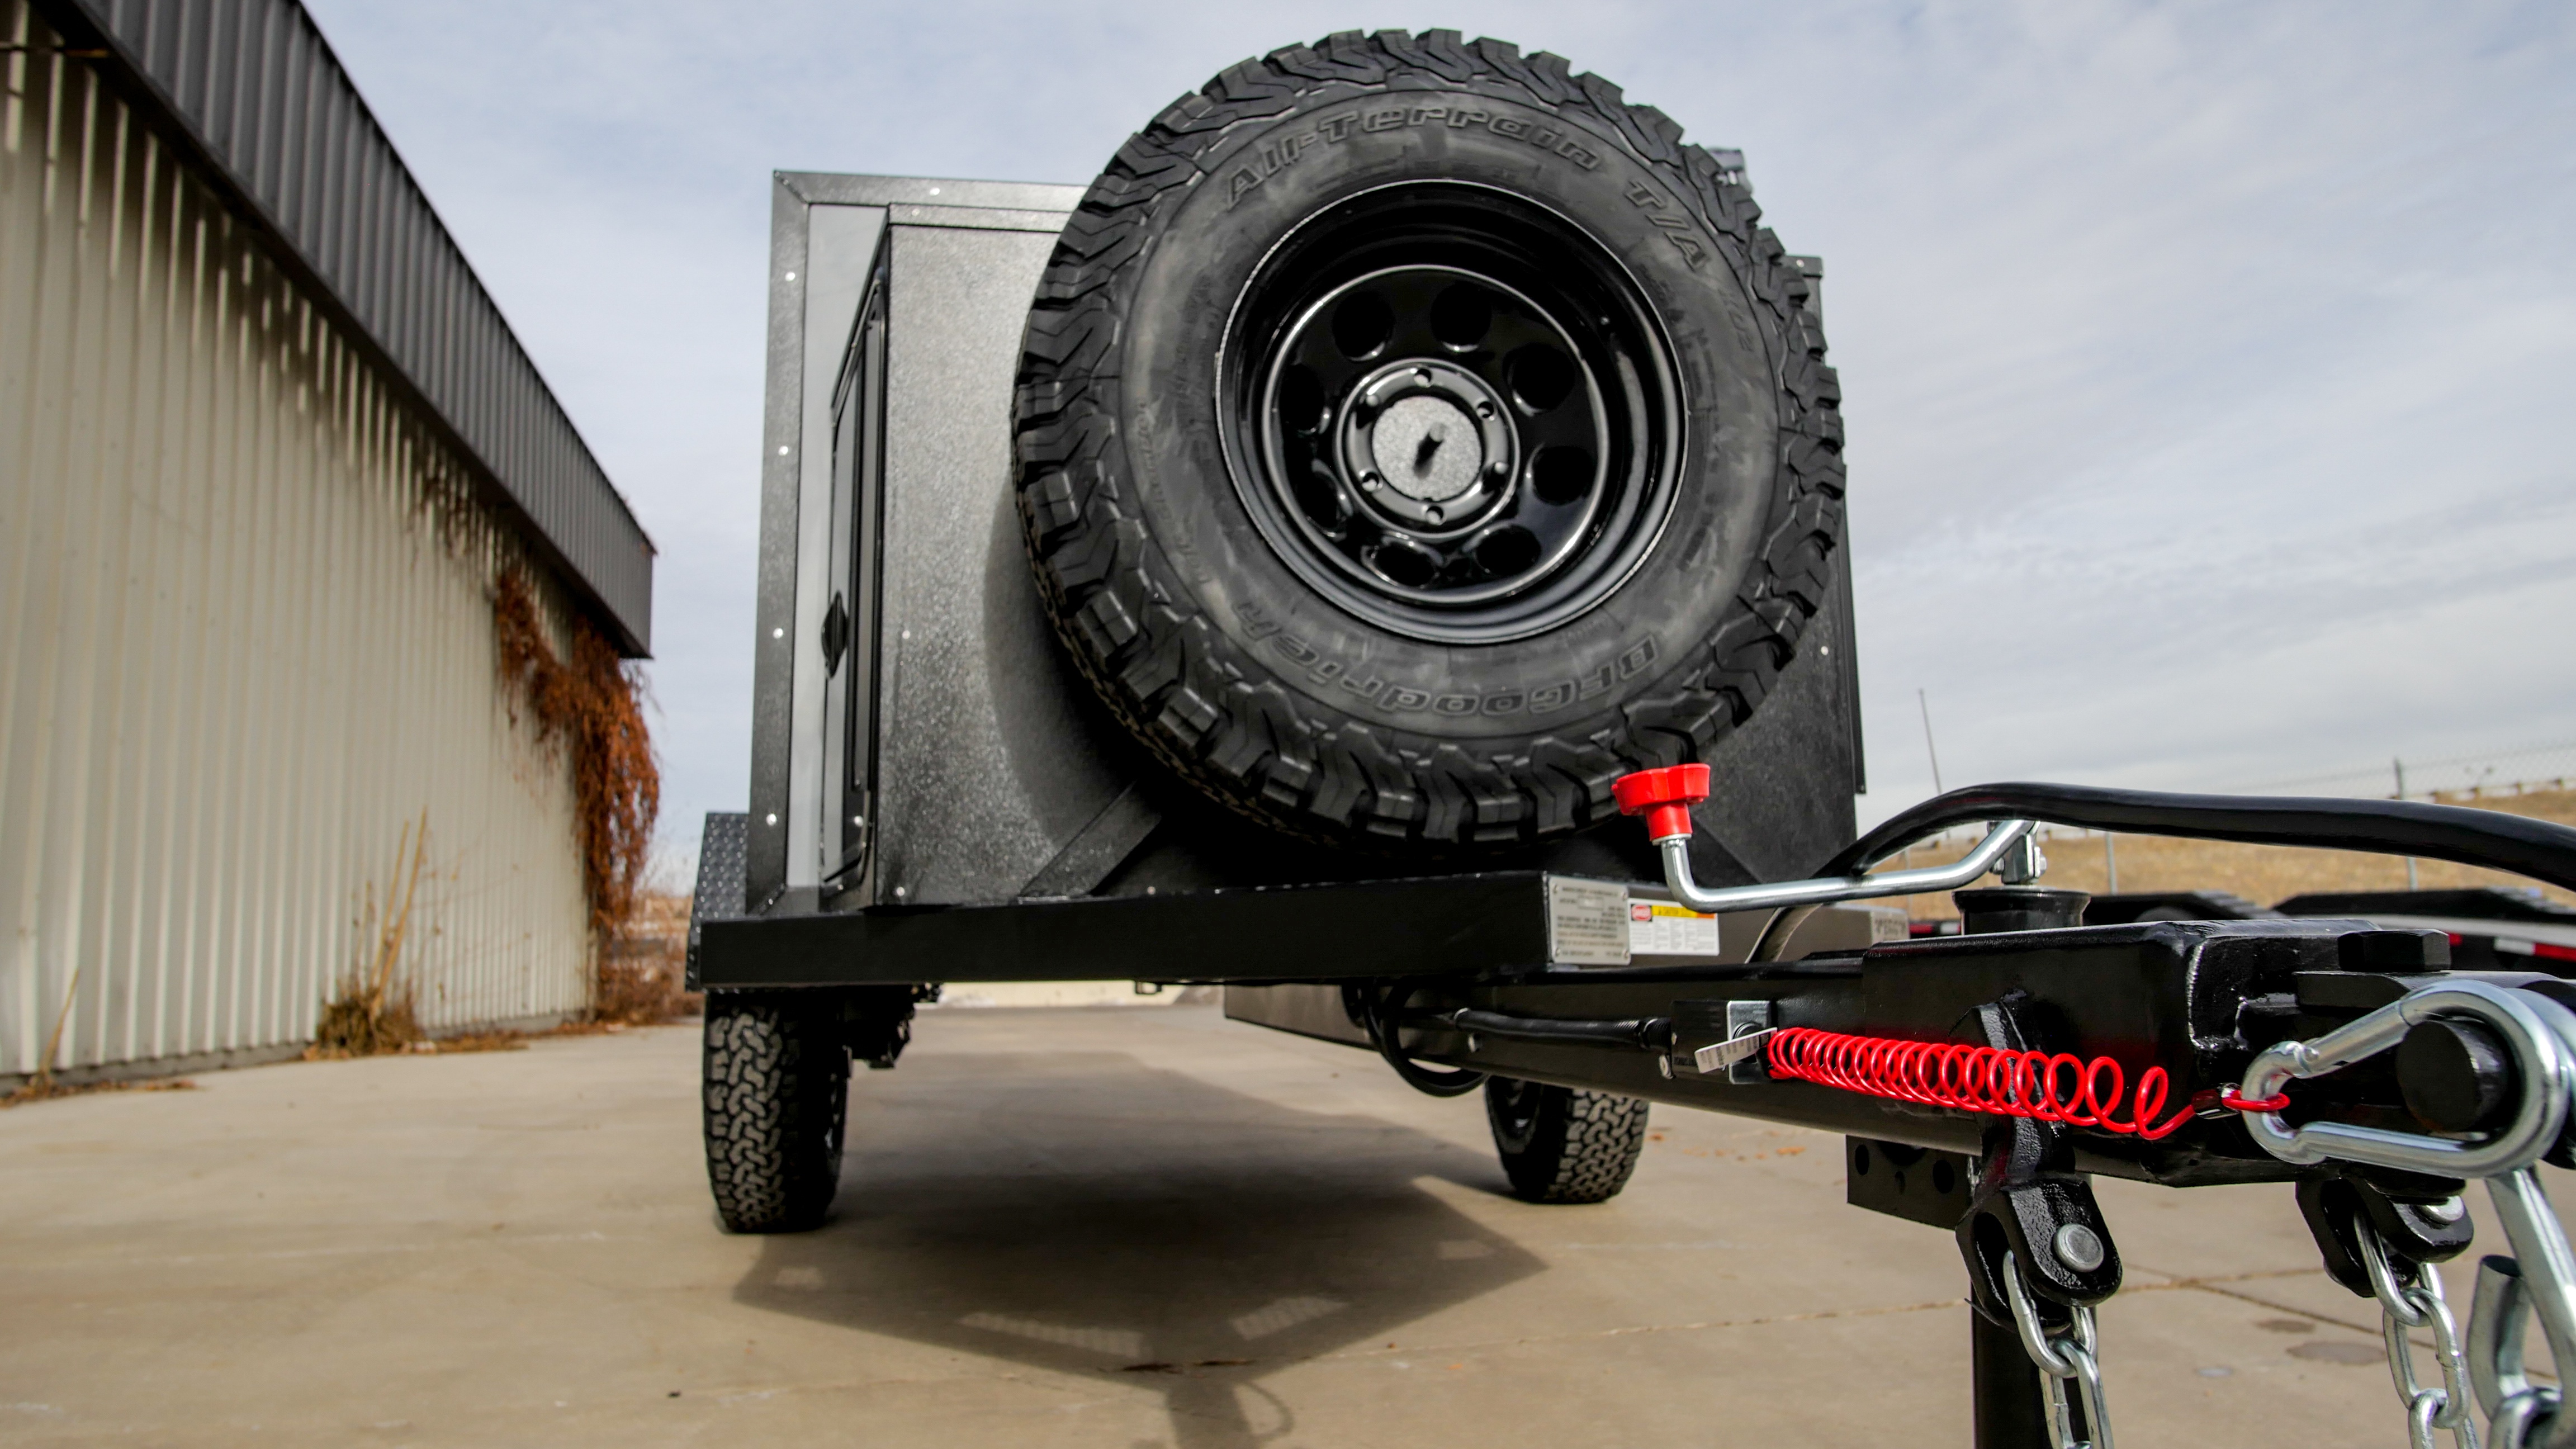 Tongue Weights and Trailer Load Positioning: The Safe Weigh